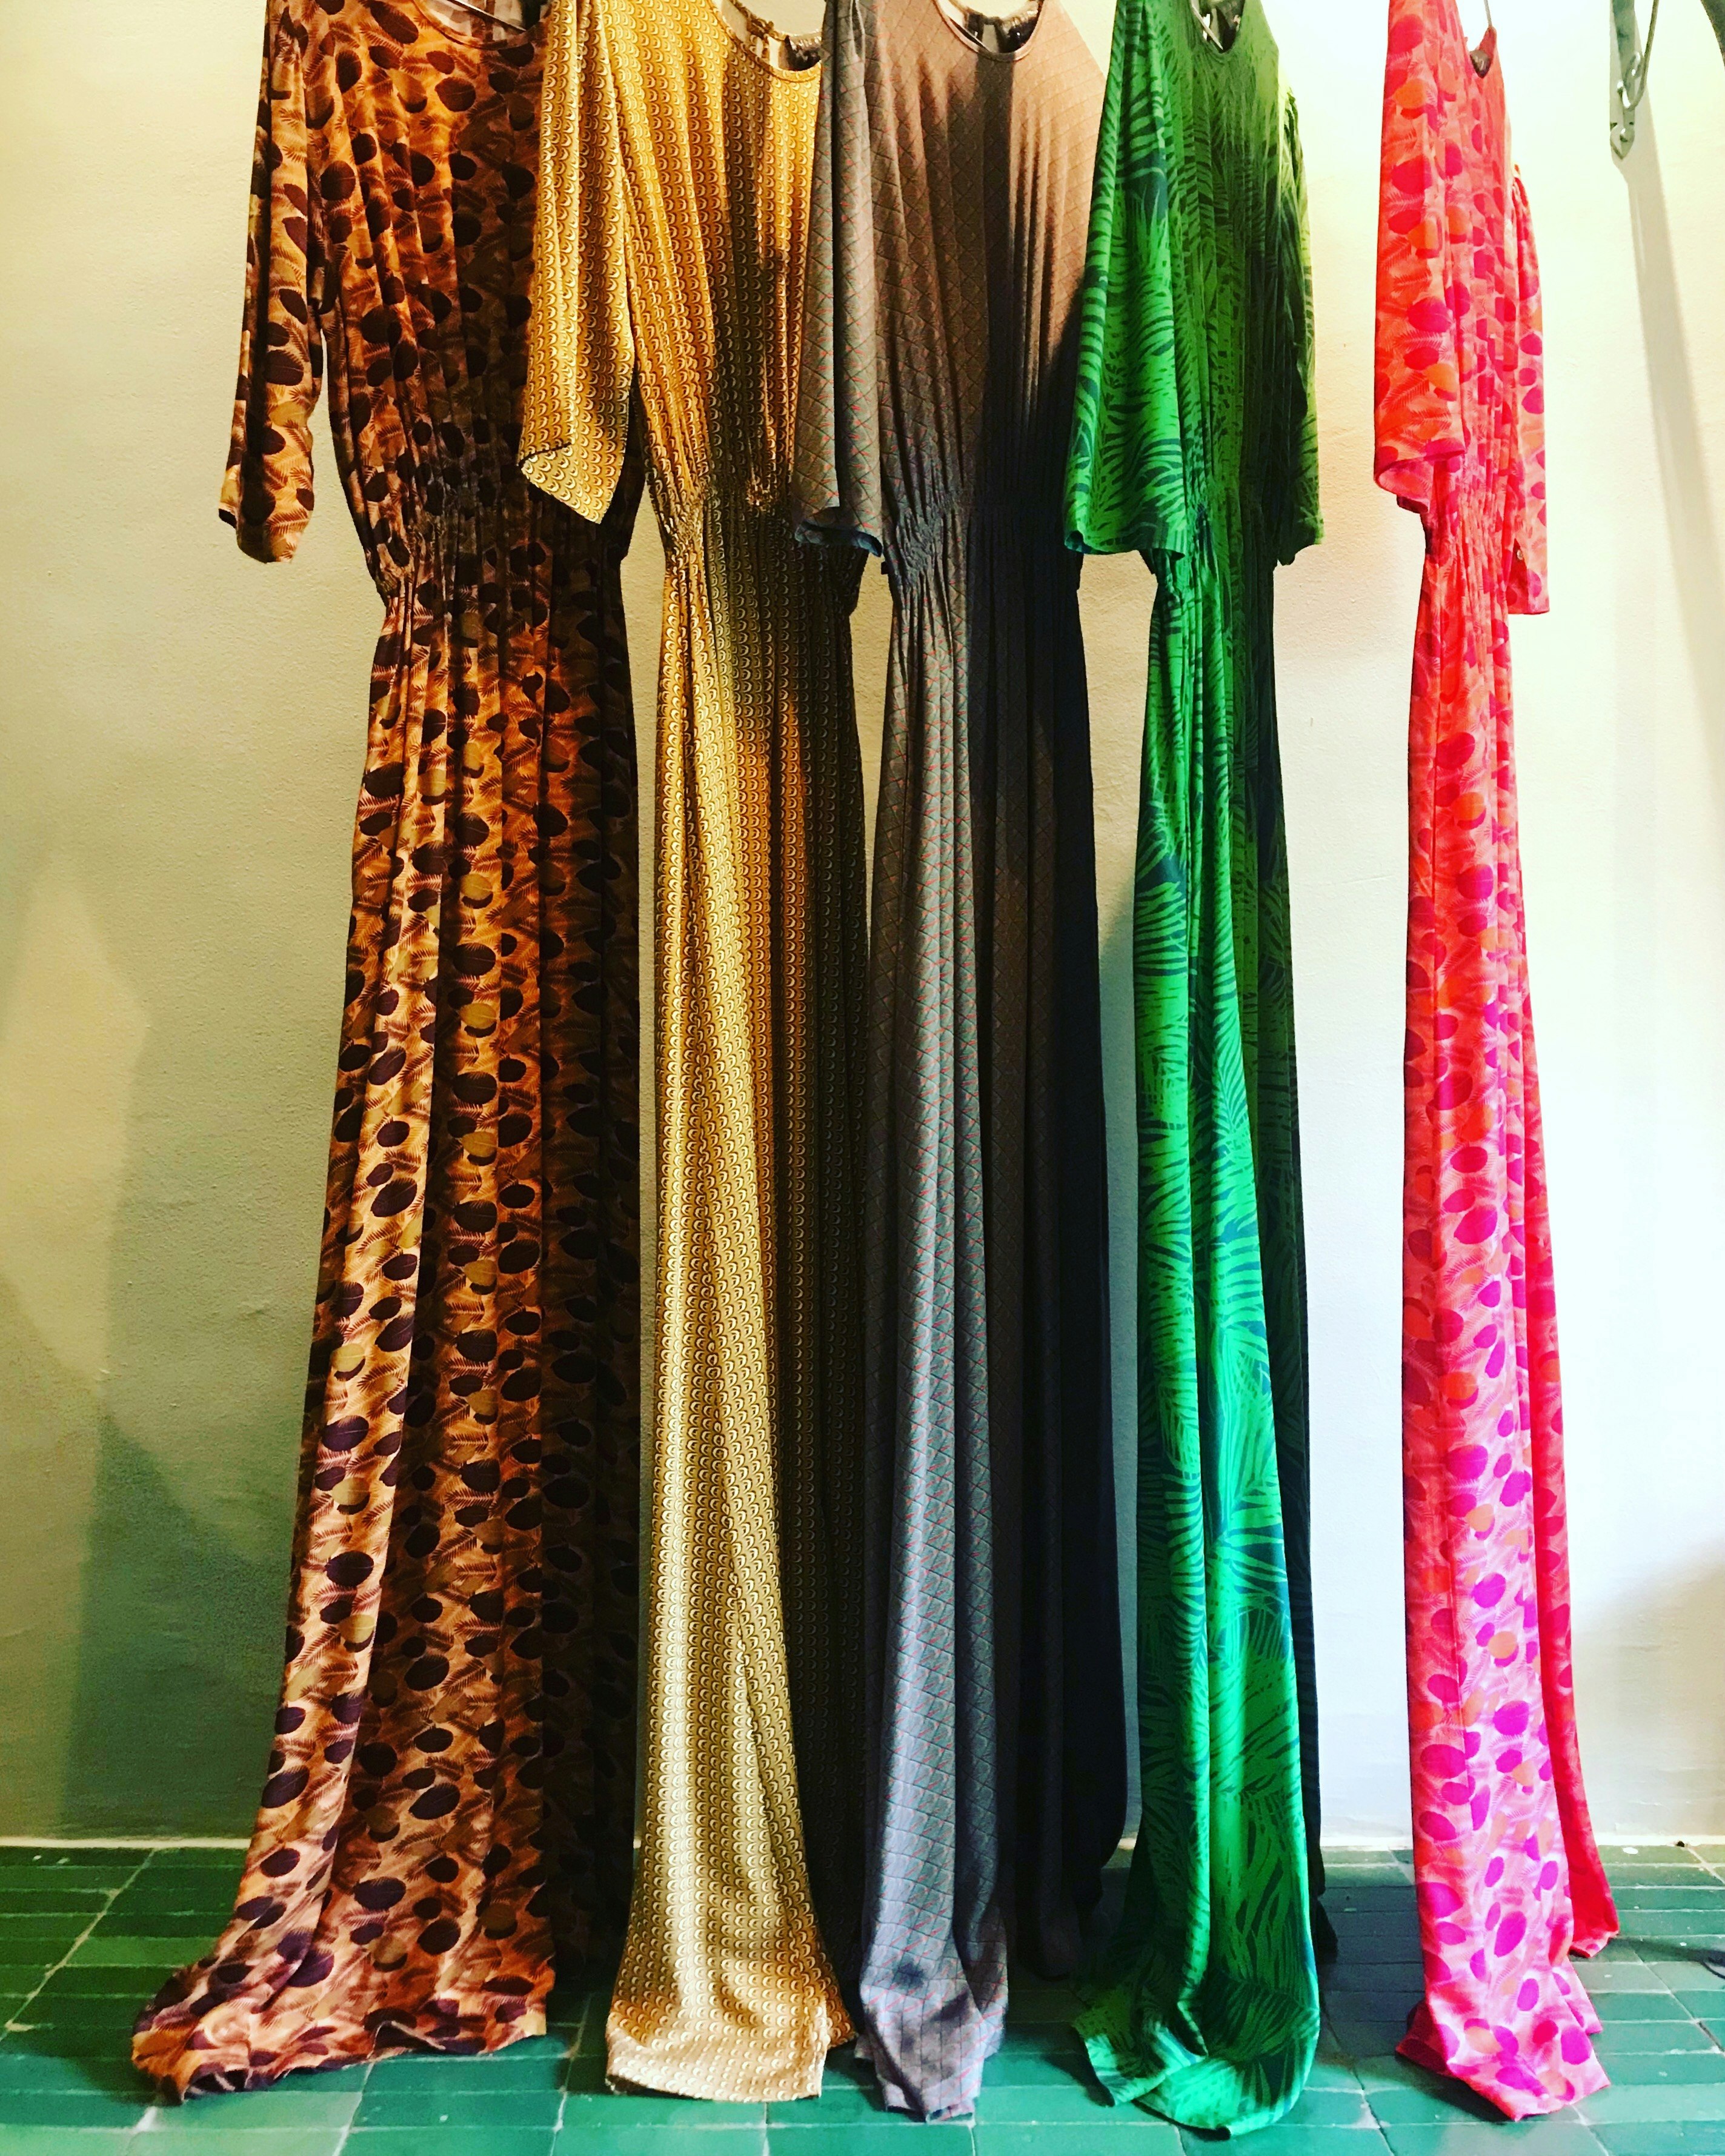 Five long silk dress of varied colours (green, gold, purple, red, silver, bronze) hang gracefully from hangers in front of a whitewashed wall.